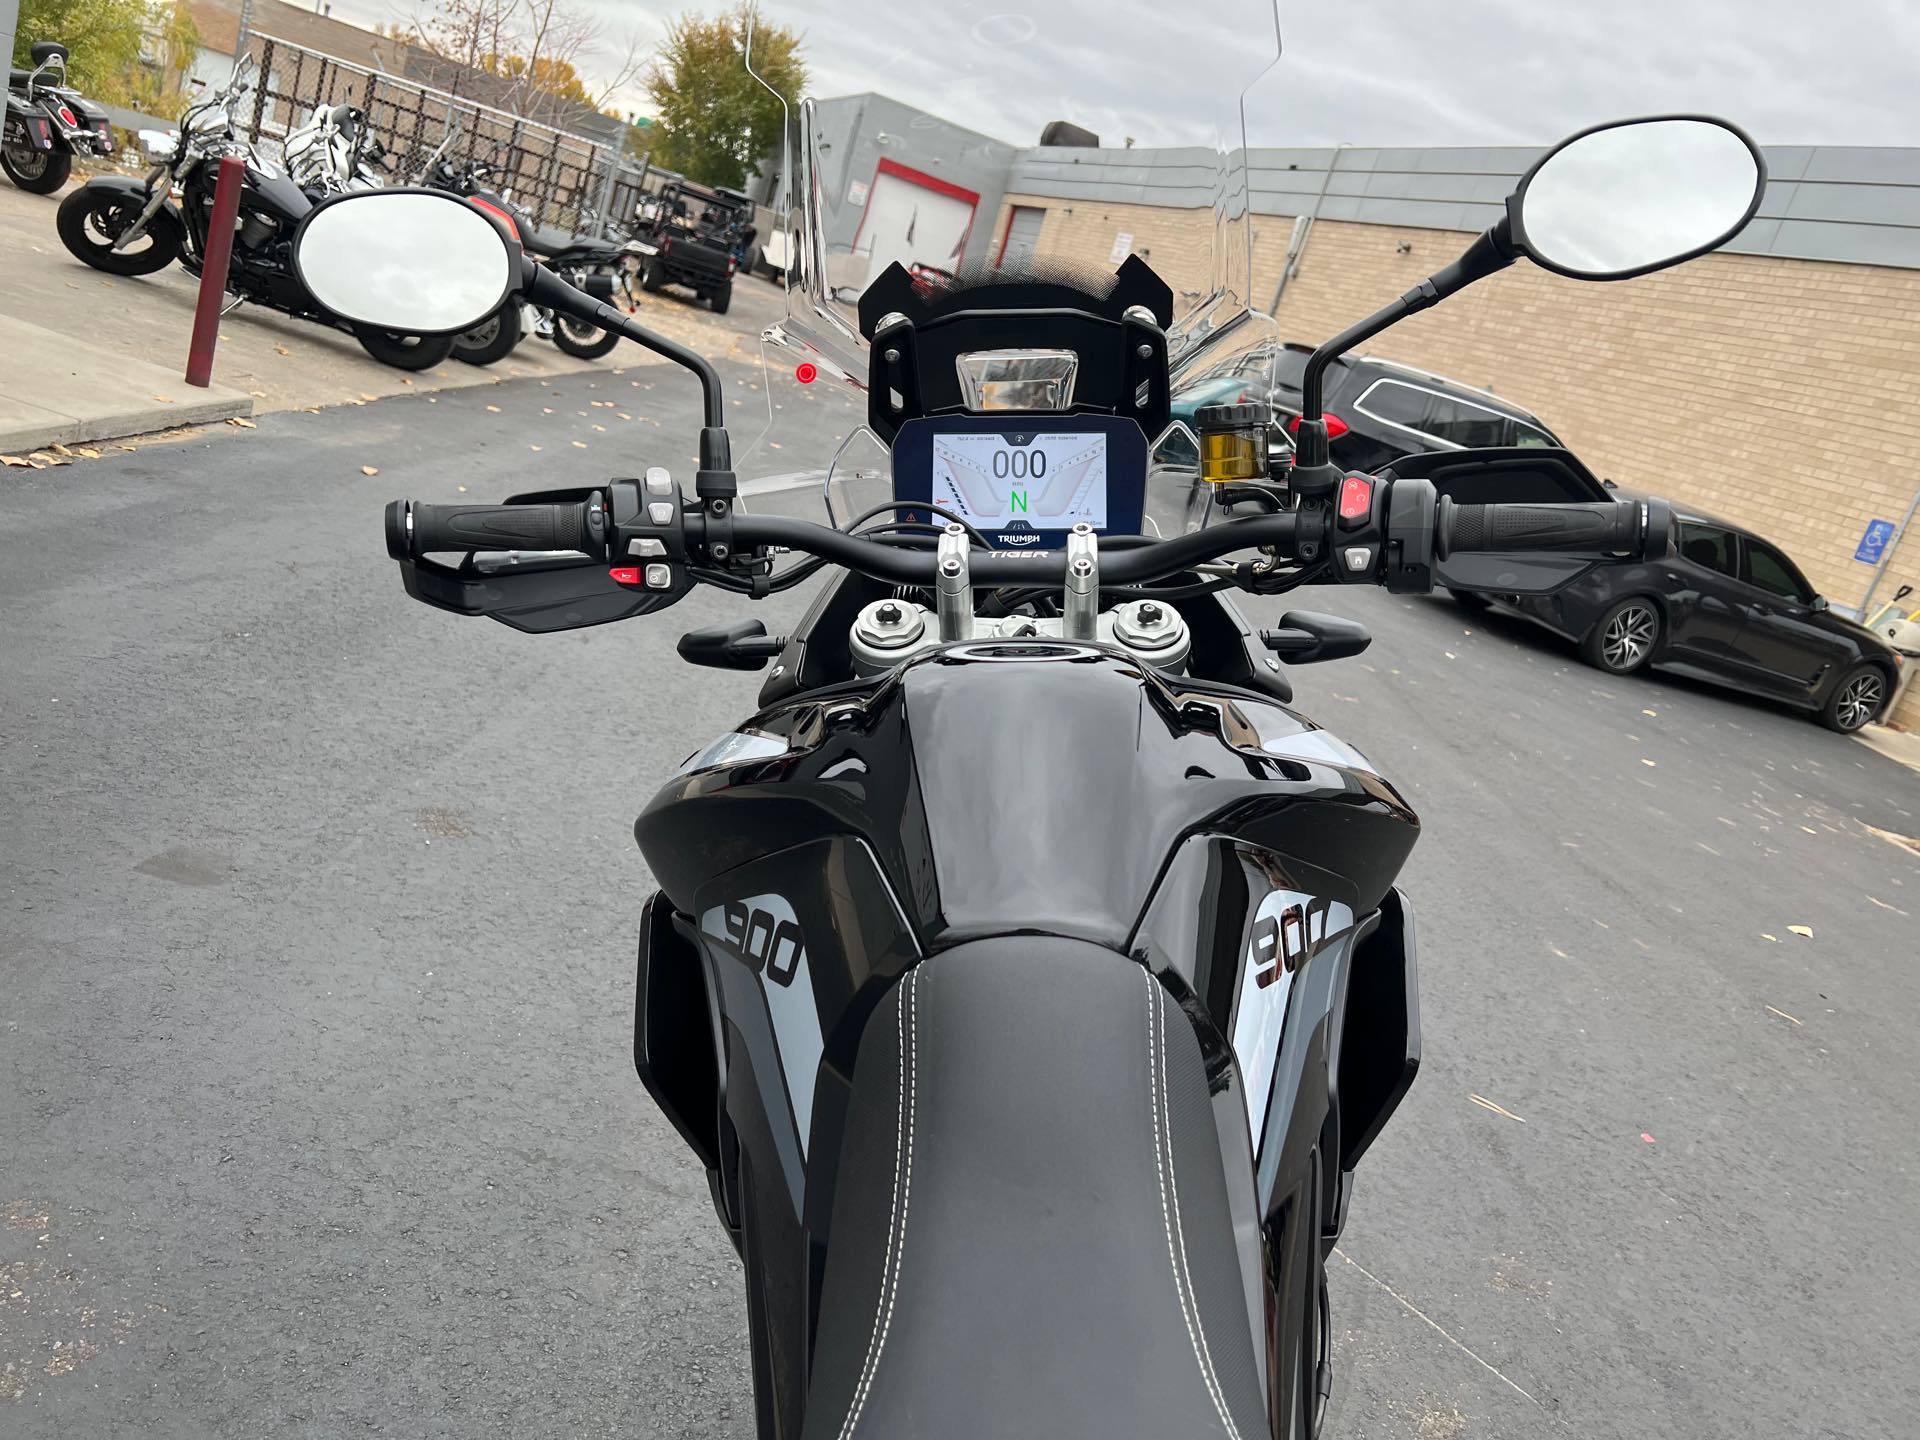 2020 Triumph Tiger 900 GT Pro at Aces Motorcycles - Fort Collins